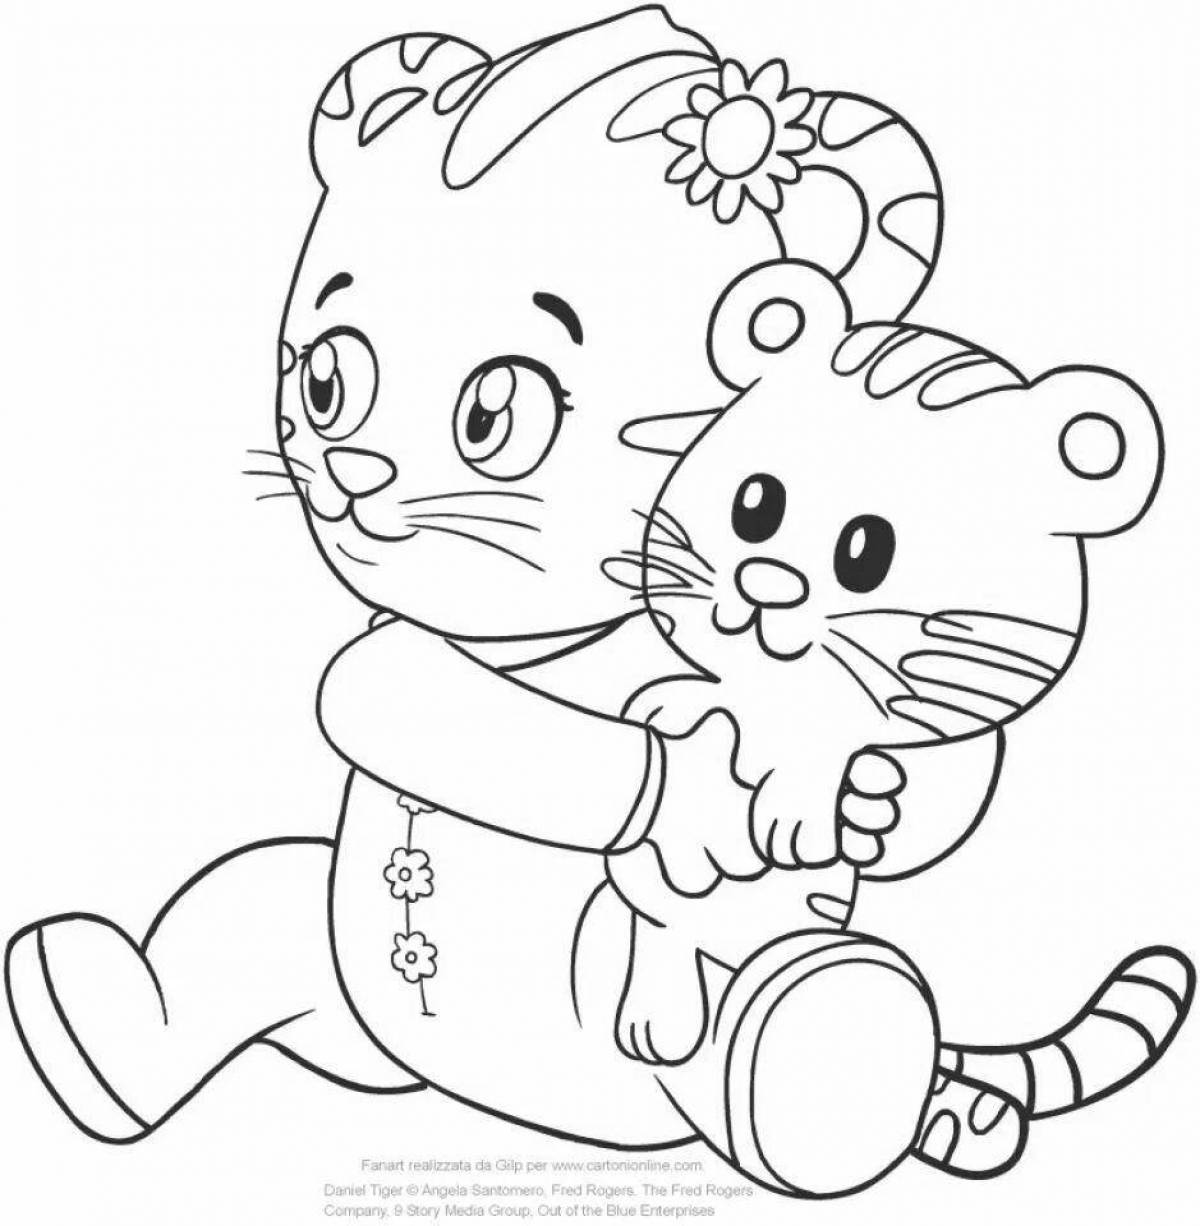 Colorful tiger cub coloring for girls